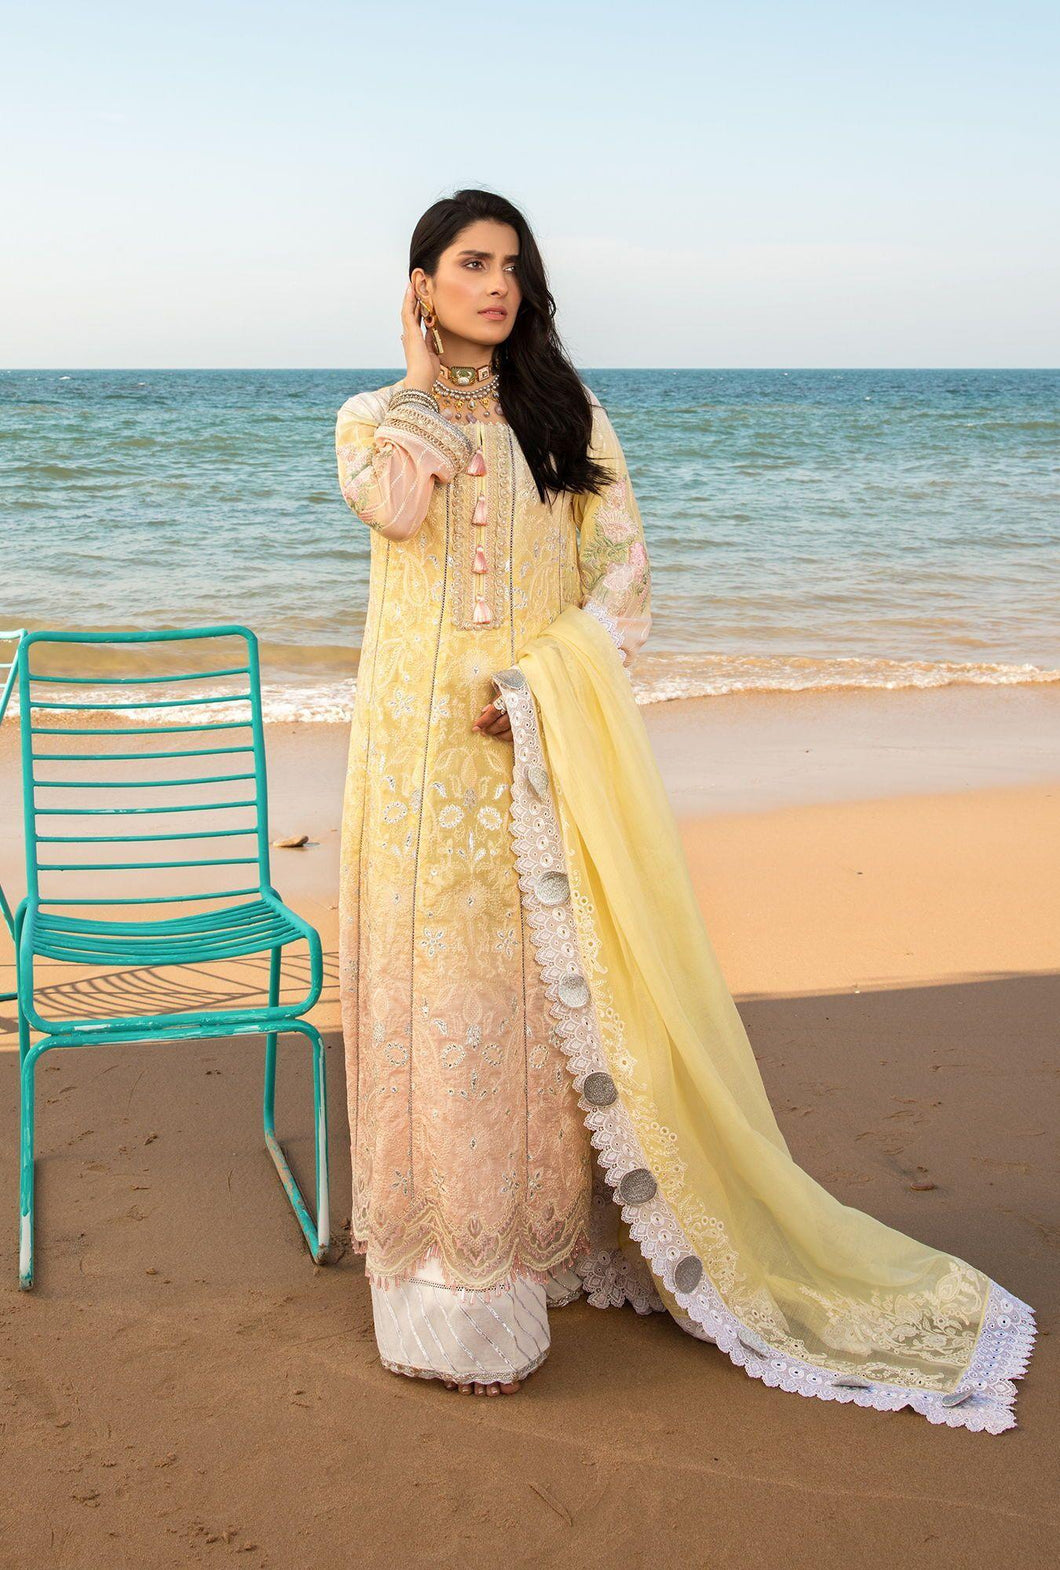 Noor by Saadia Asad - NOOR LUXURY LAWN 2021 Yellow Lawn Suit from Lebaasonline Largest Pakistani Clothes Stockist in the UK! Shop Noor Pakistani Lawn 2021, MARIA B M PRINTS, IMROZIA 2021 Summer Suits Pakistani Clothes Online UK for Wedding, Party & Bridal Wear. Indian & Pakistani Summer Dresses UK & Australia & USA